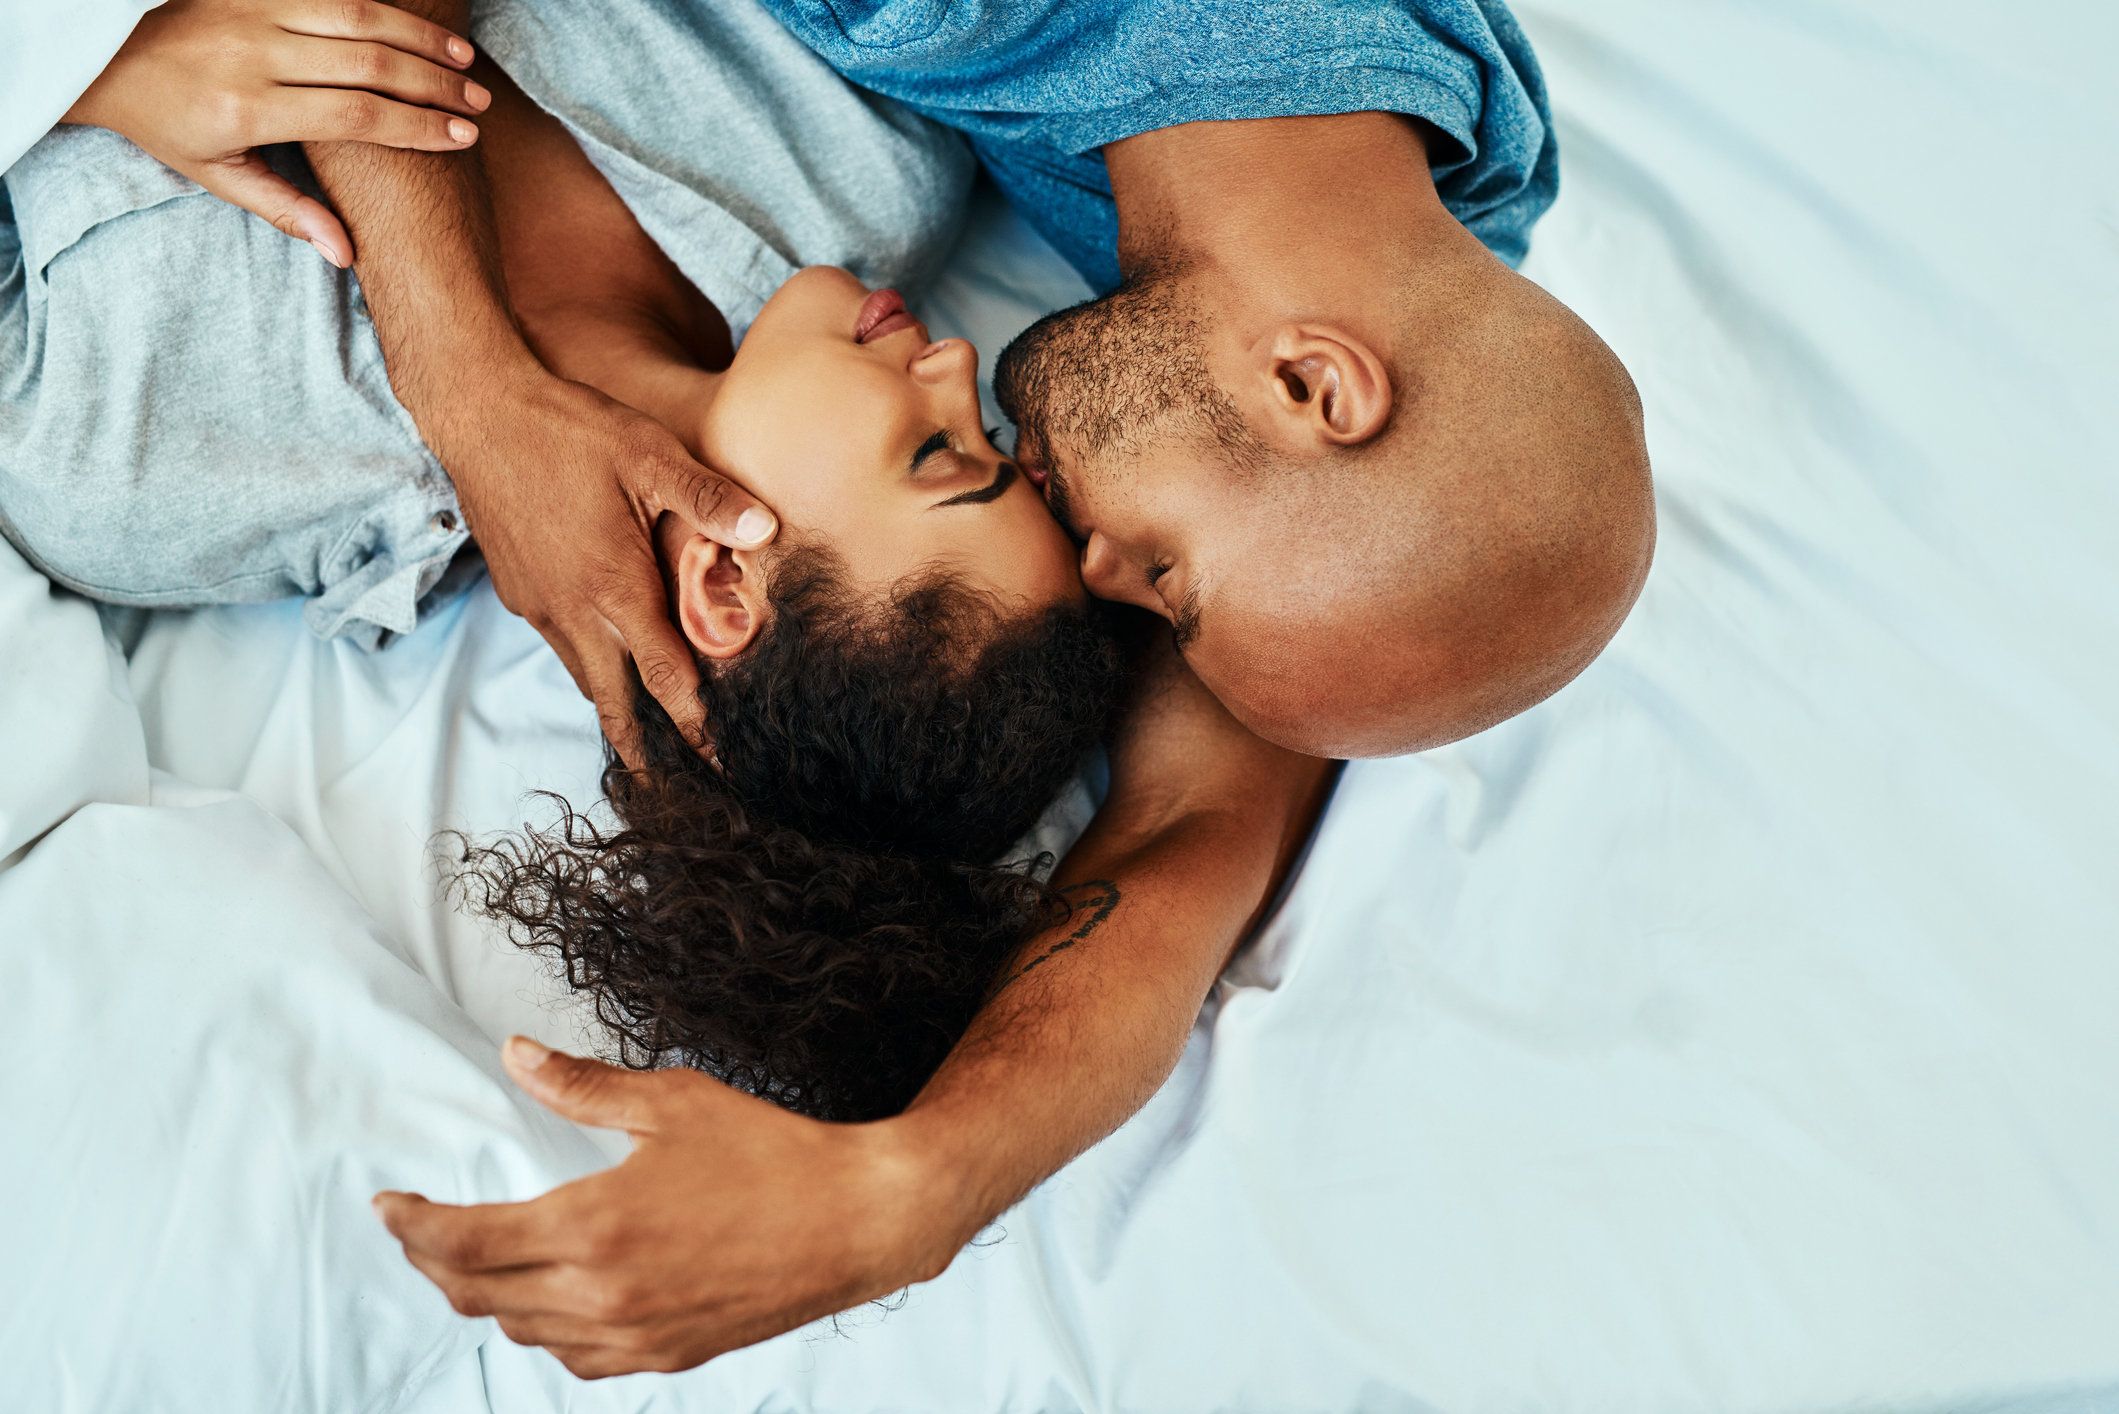 10 Married Couples Share The Keys To Their Totally Off-The-Chain Sex Life pic